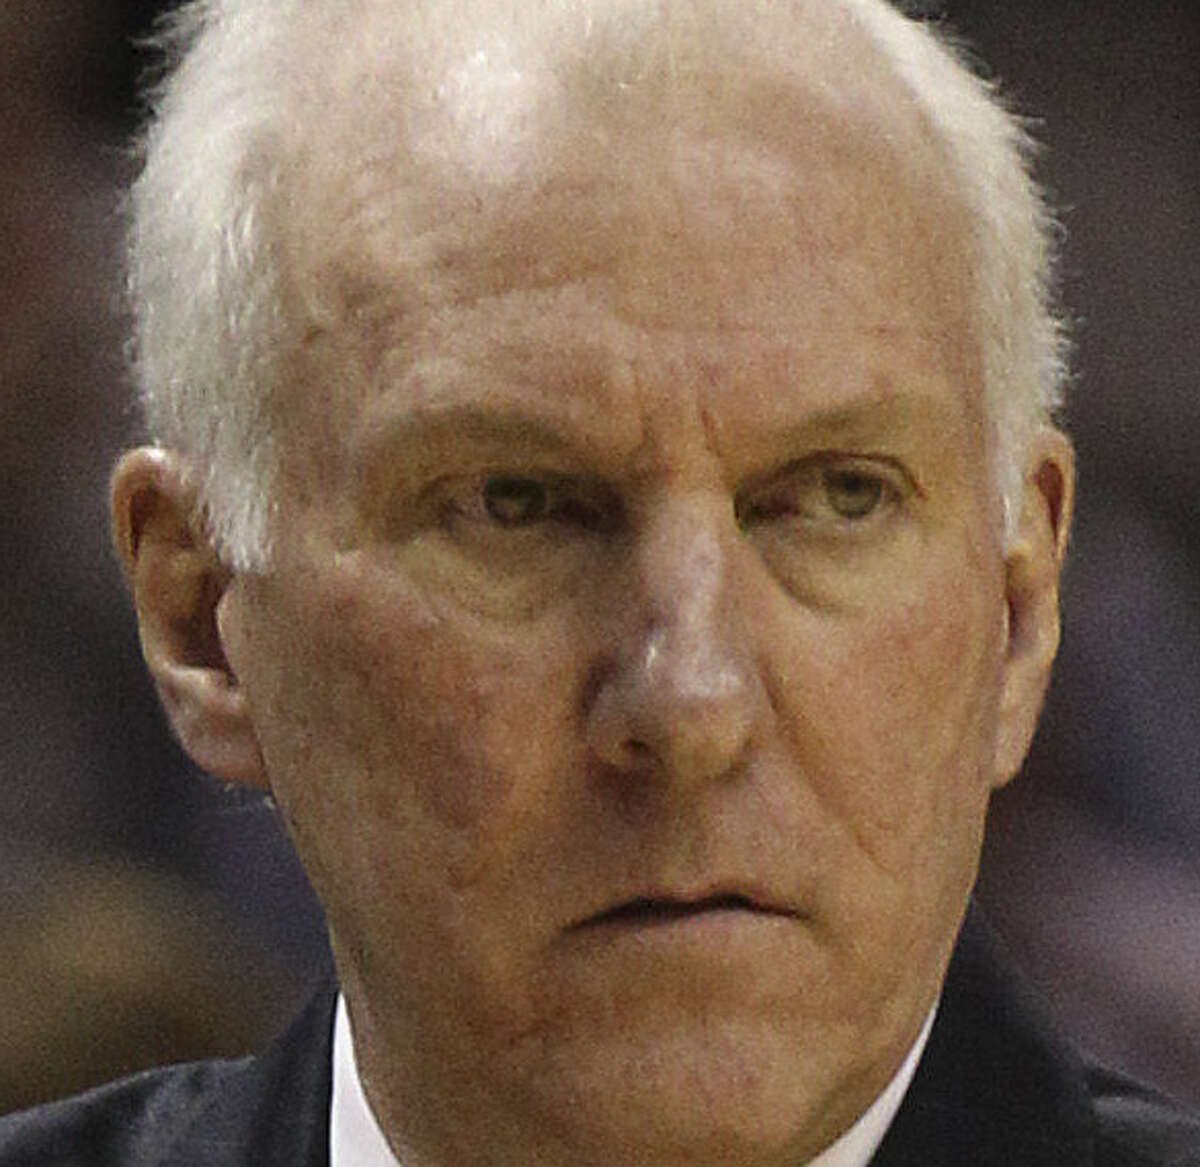 how-well-do-you-know-spurs-coach-gregg-popovich